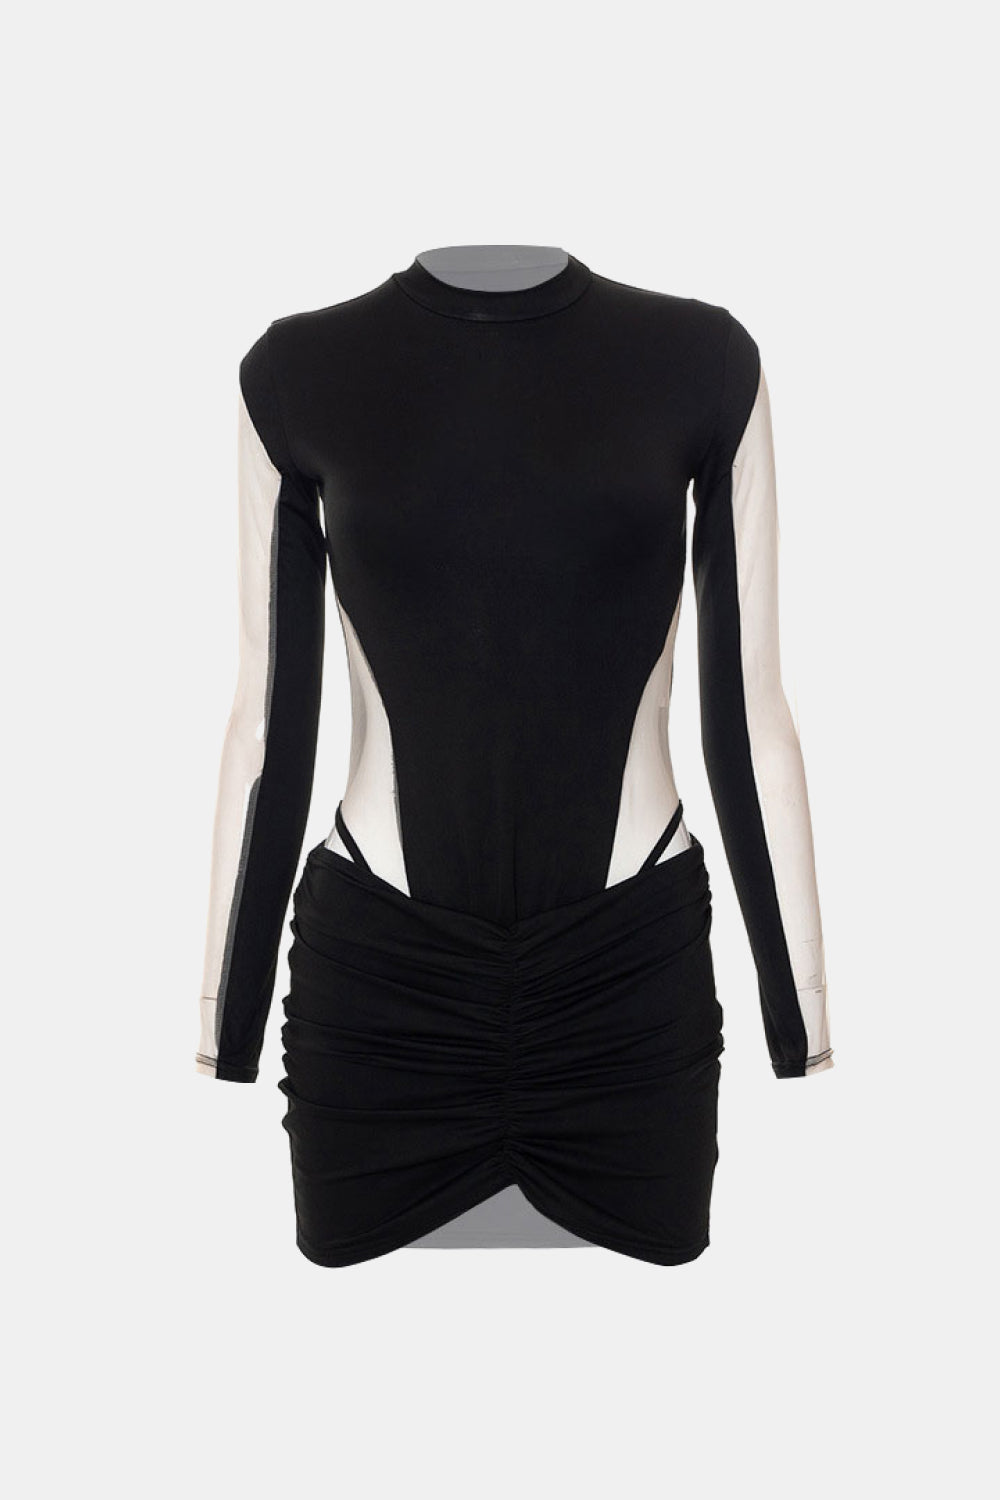 Spliced Mesh Bodysuit and Ruched Skirt Set - Outlets Forever